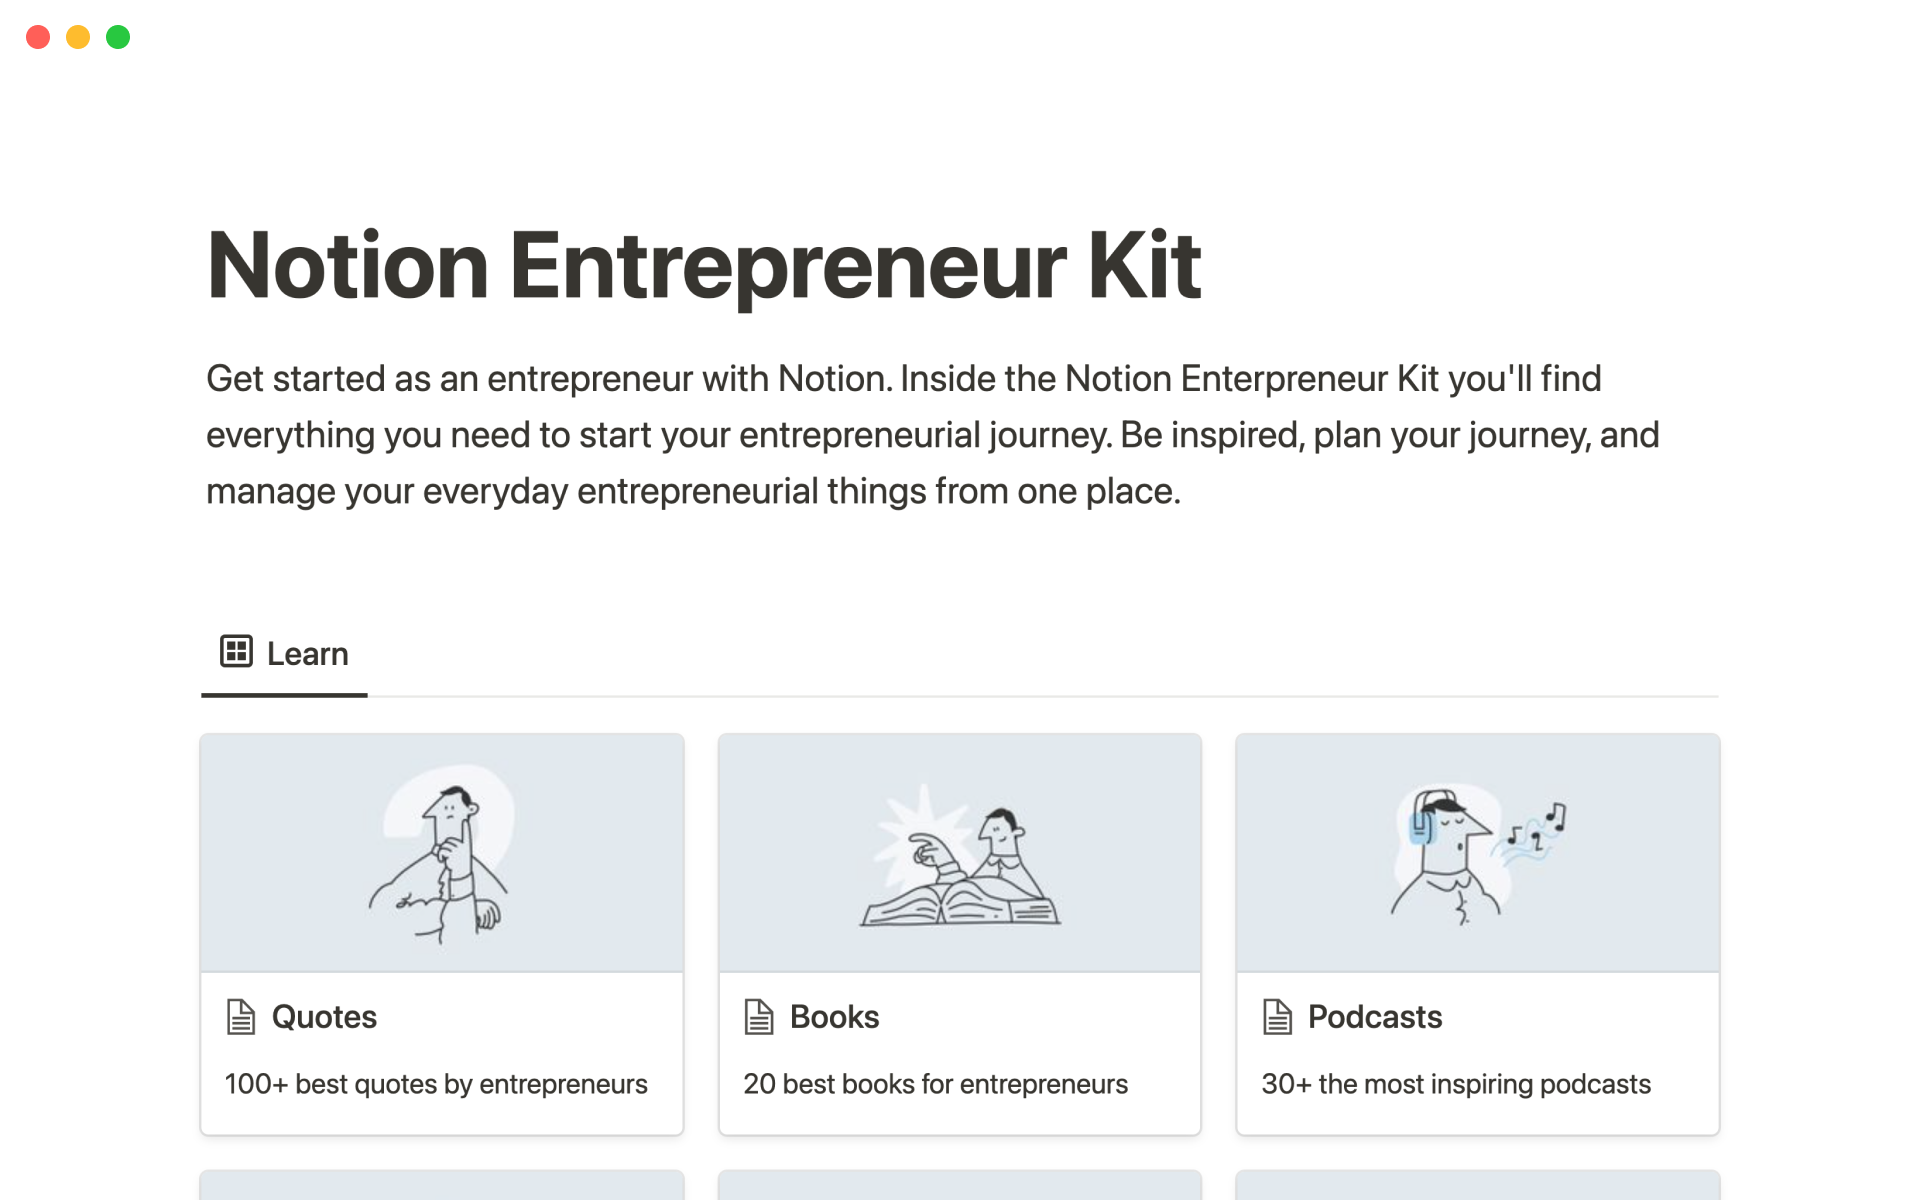 Use this template to get started as an entrepreneur.